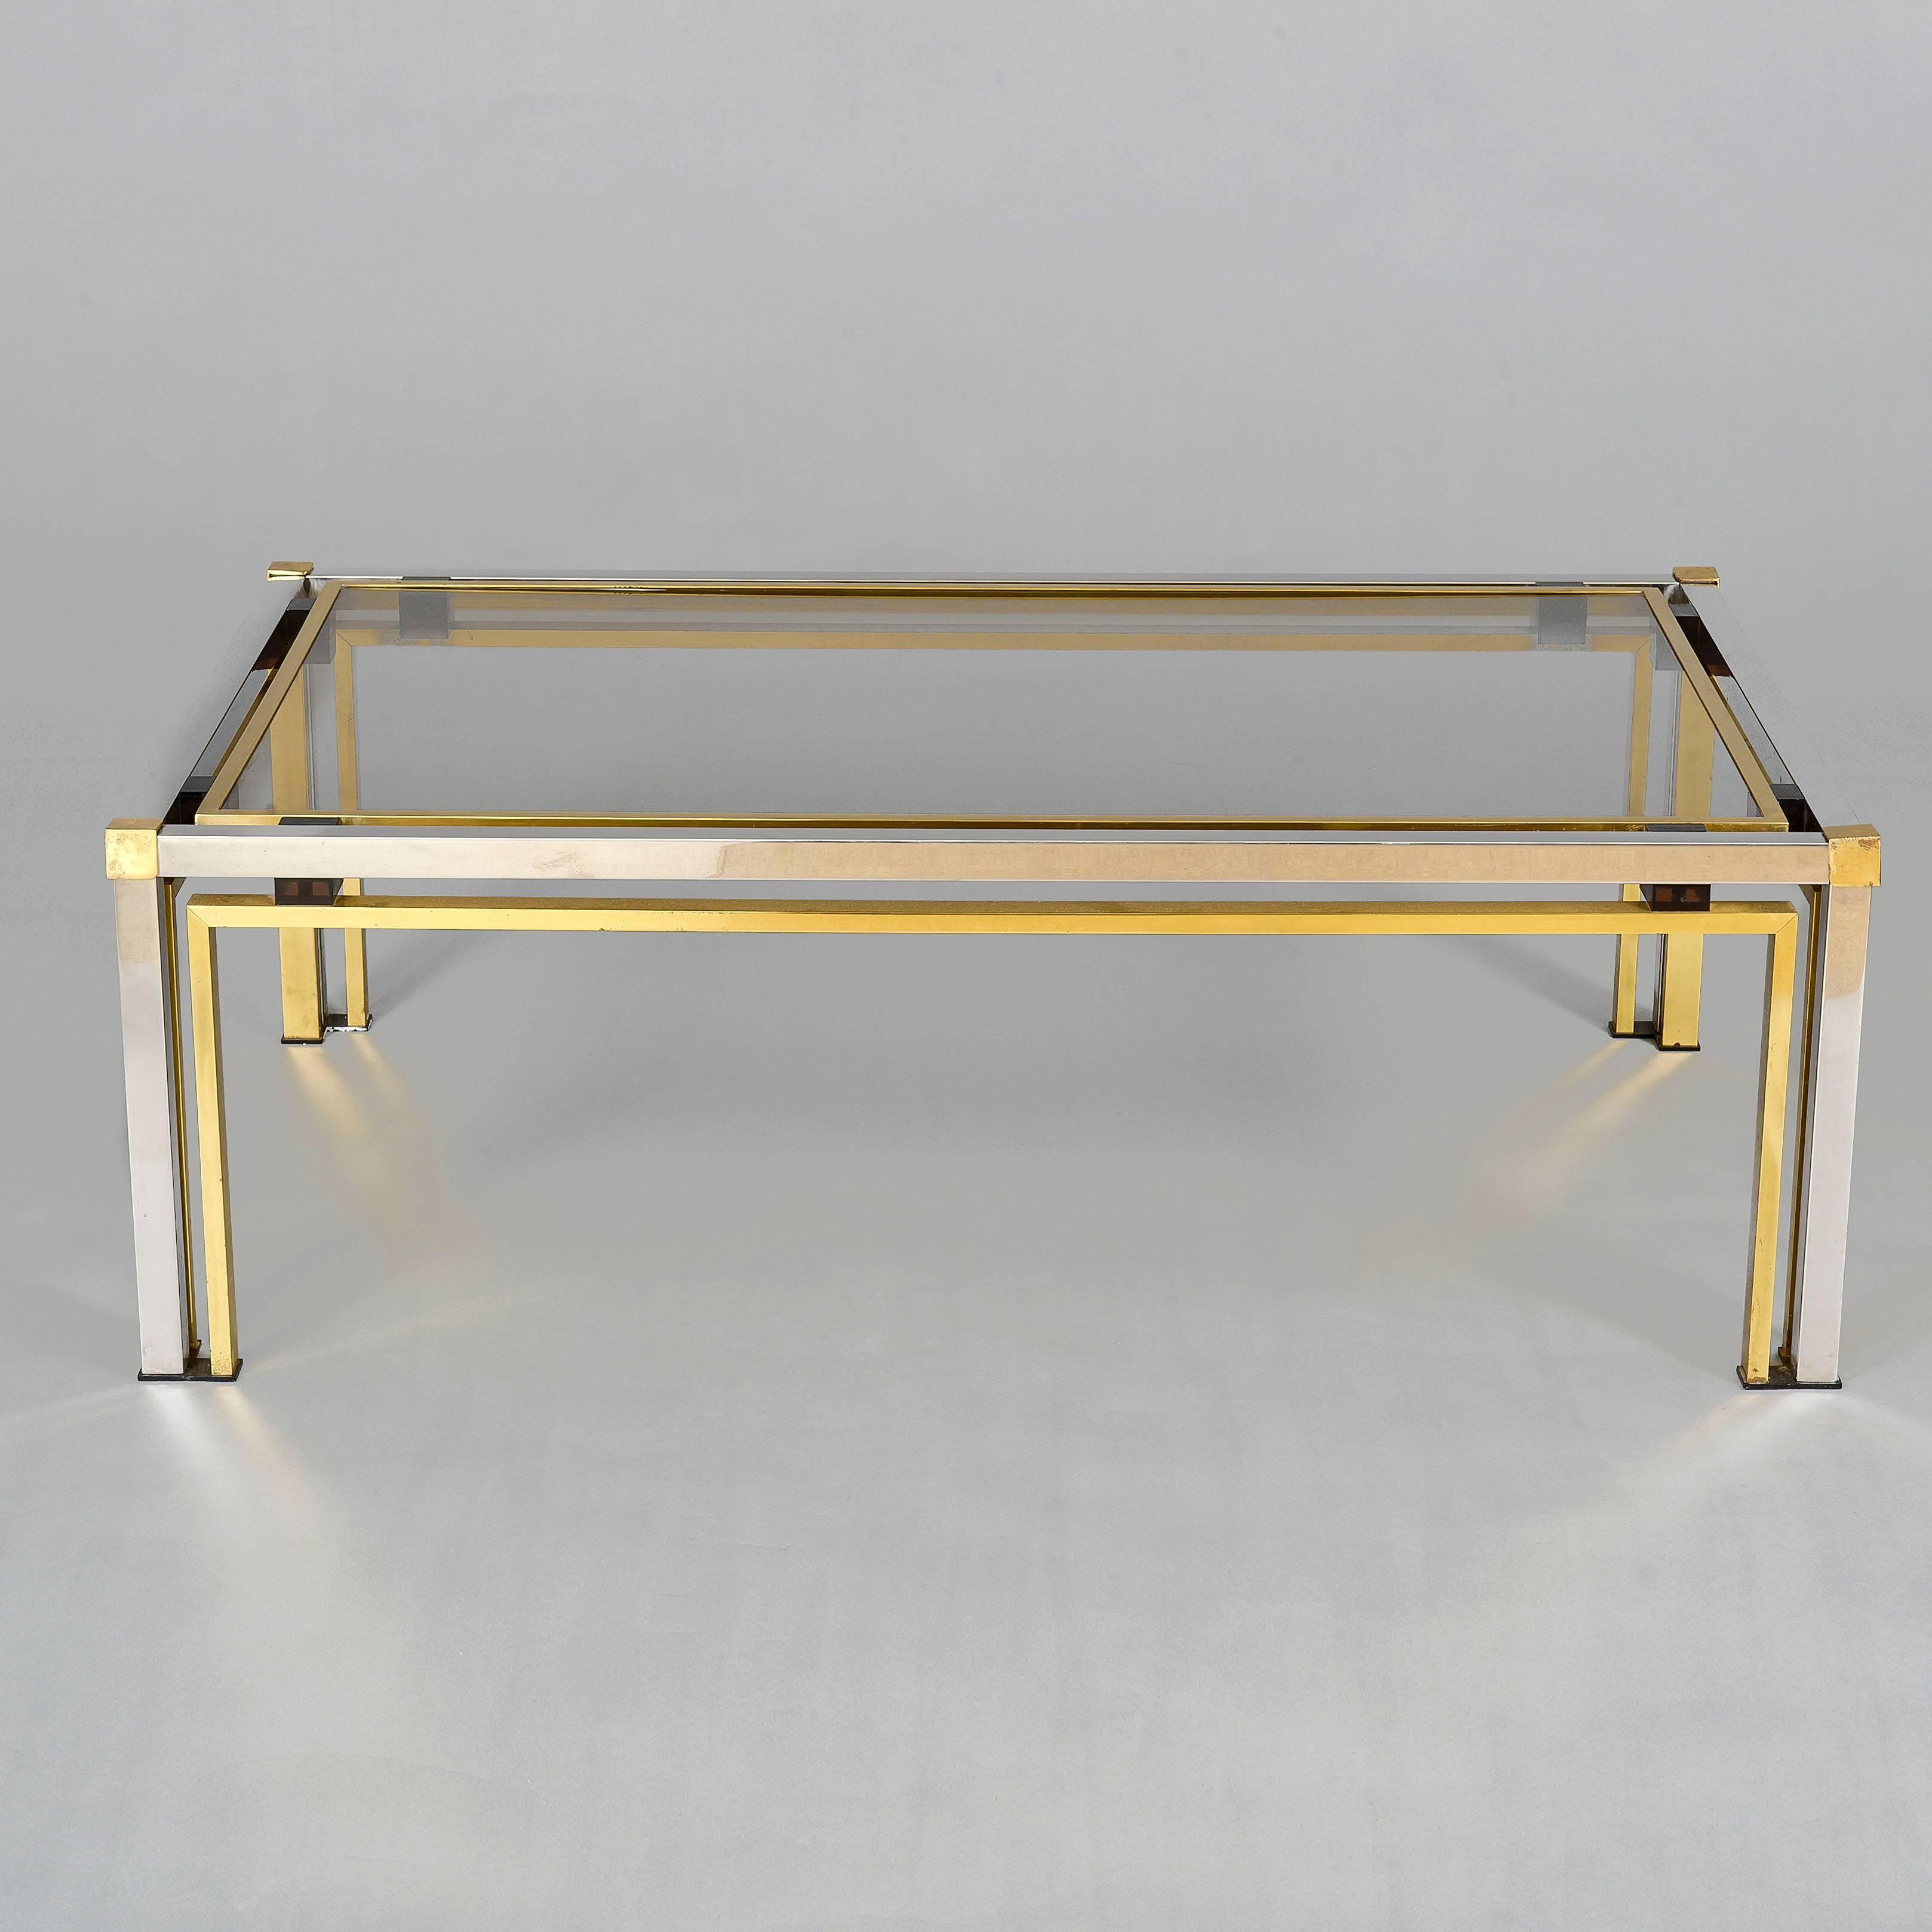 Elegant double-framed centre table in chrome and brass with smoked glass top.